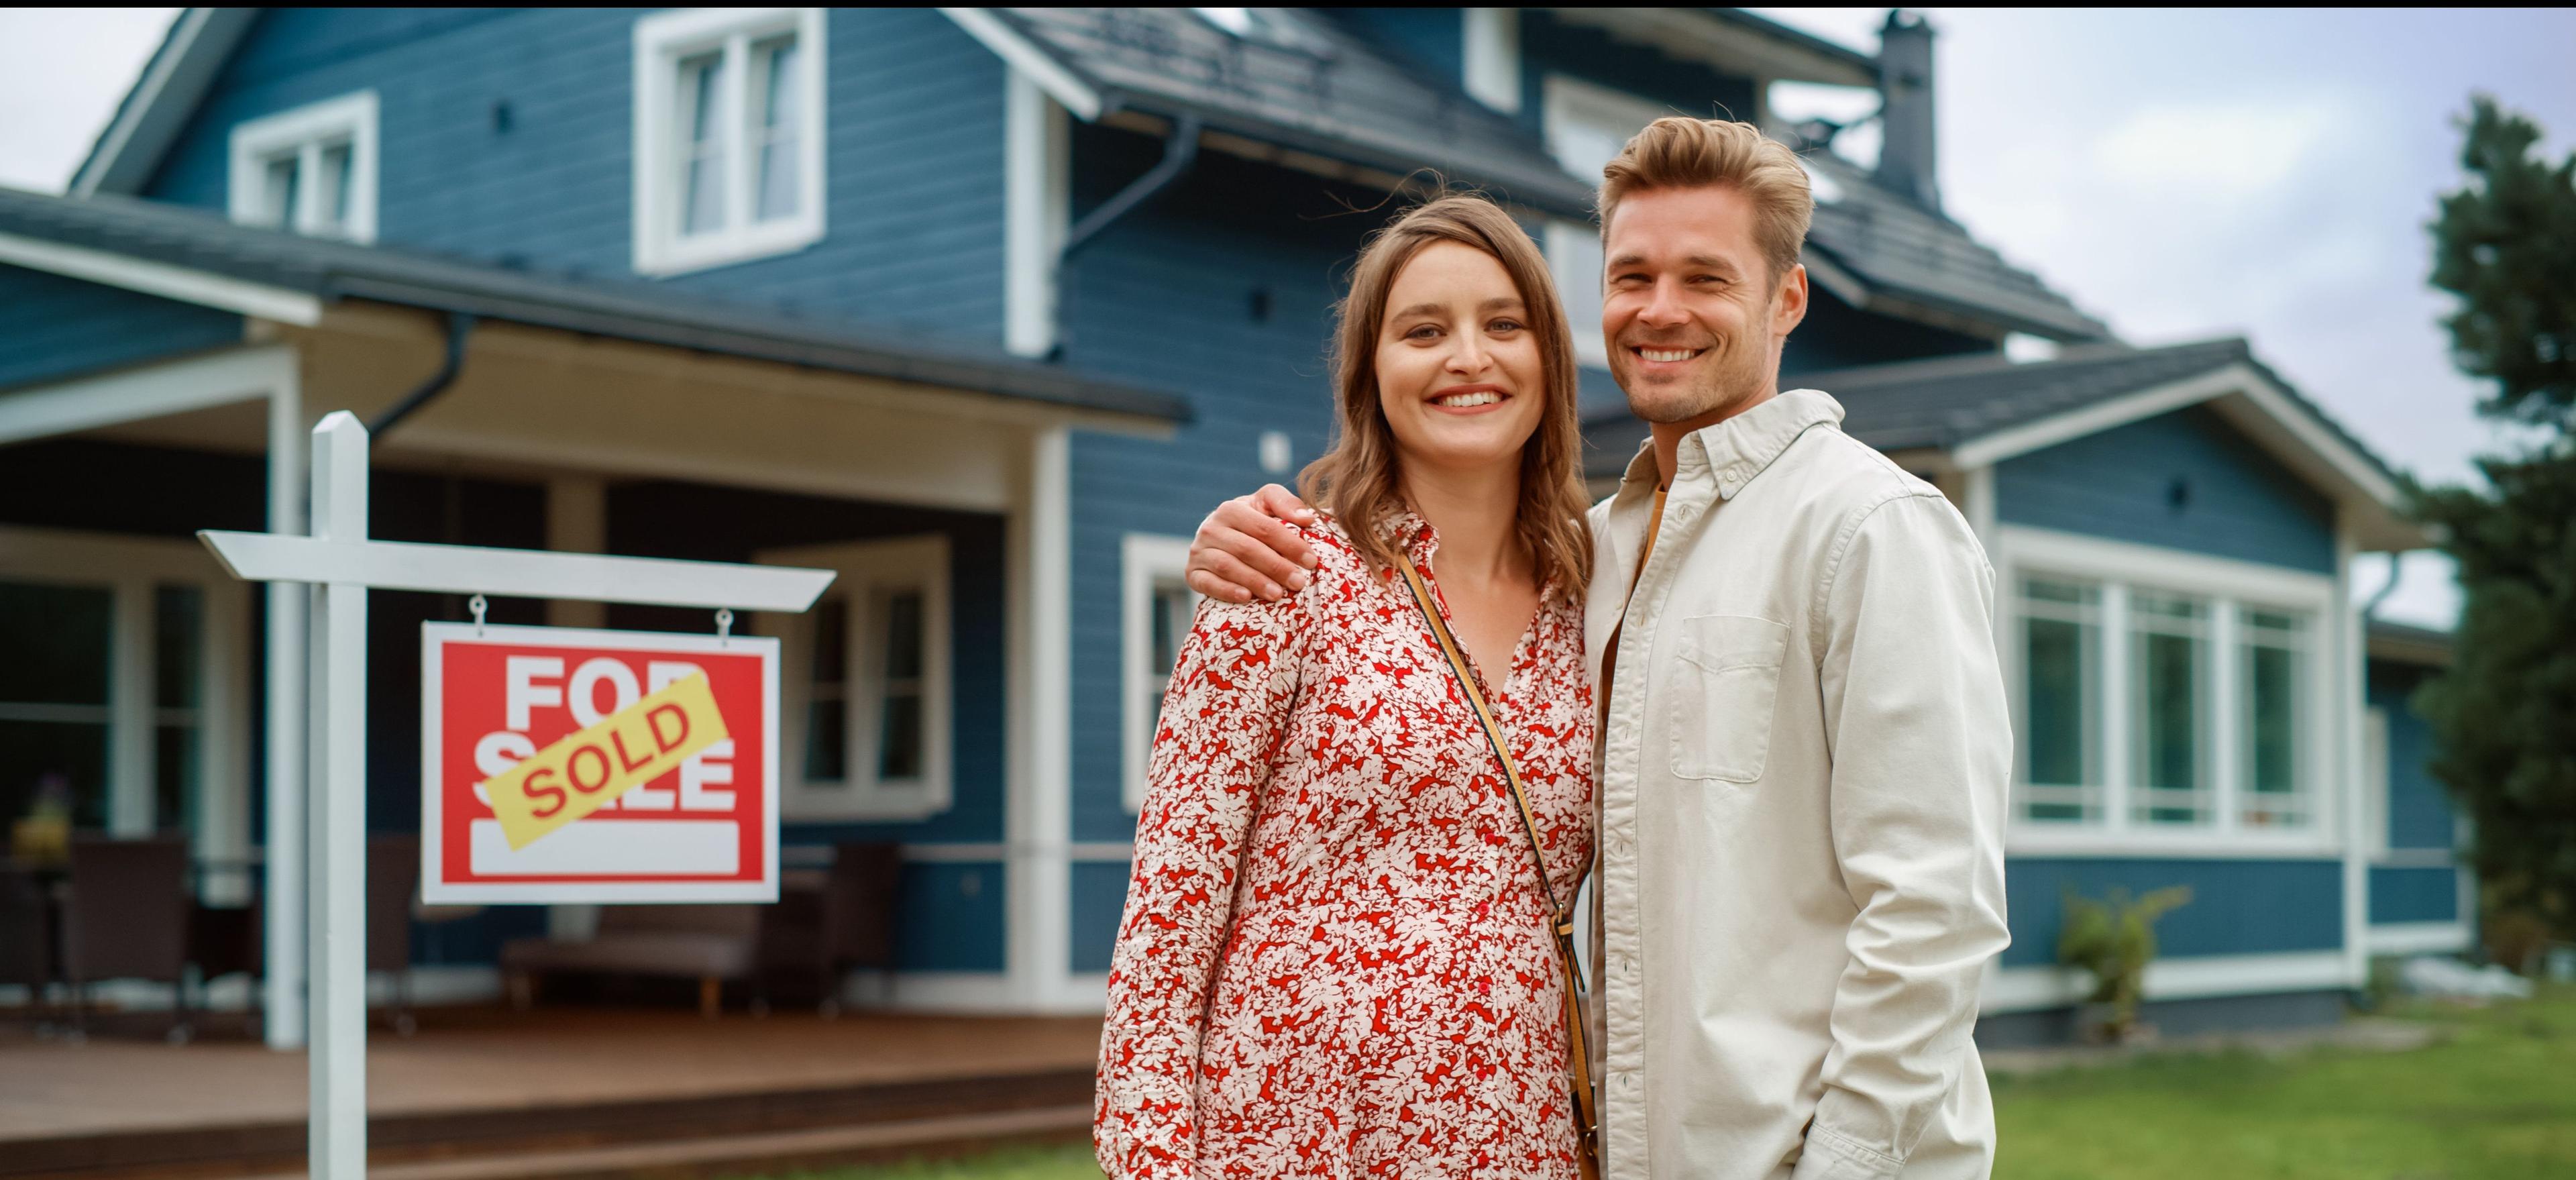 Smiling couple in front of a home sold sign board.